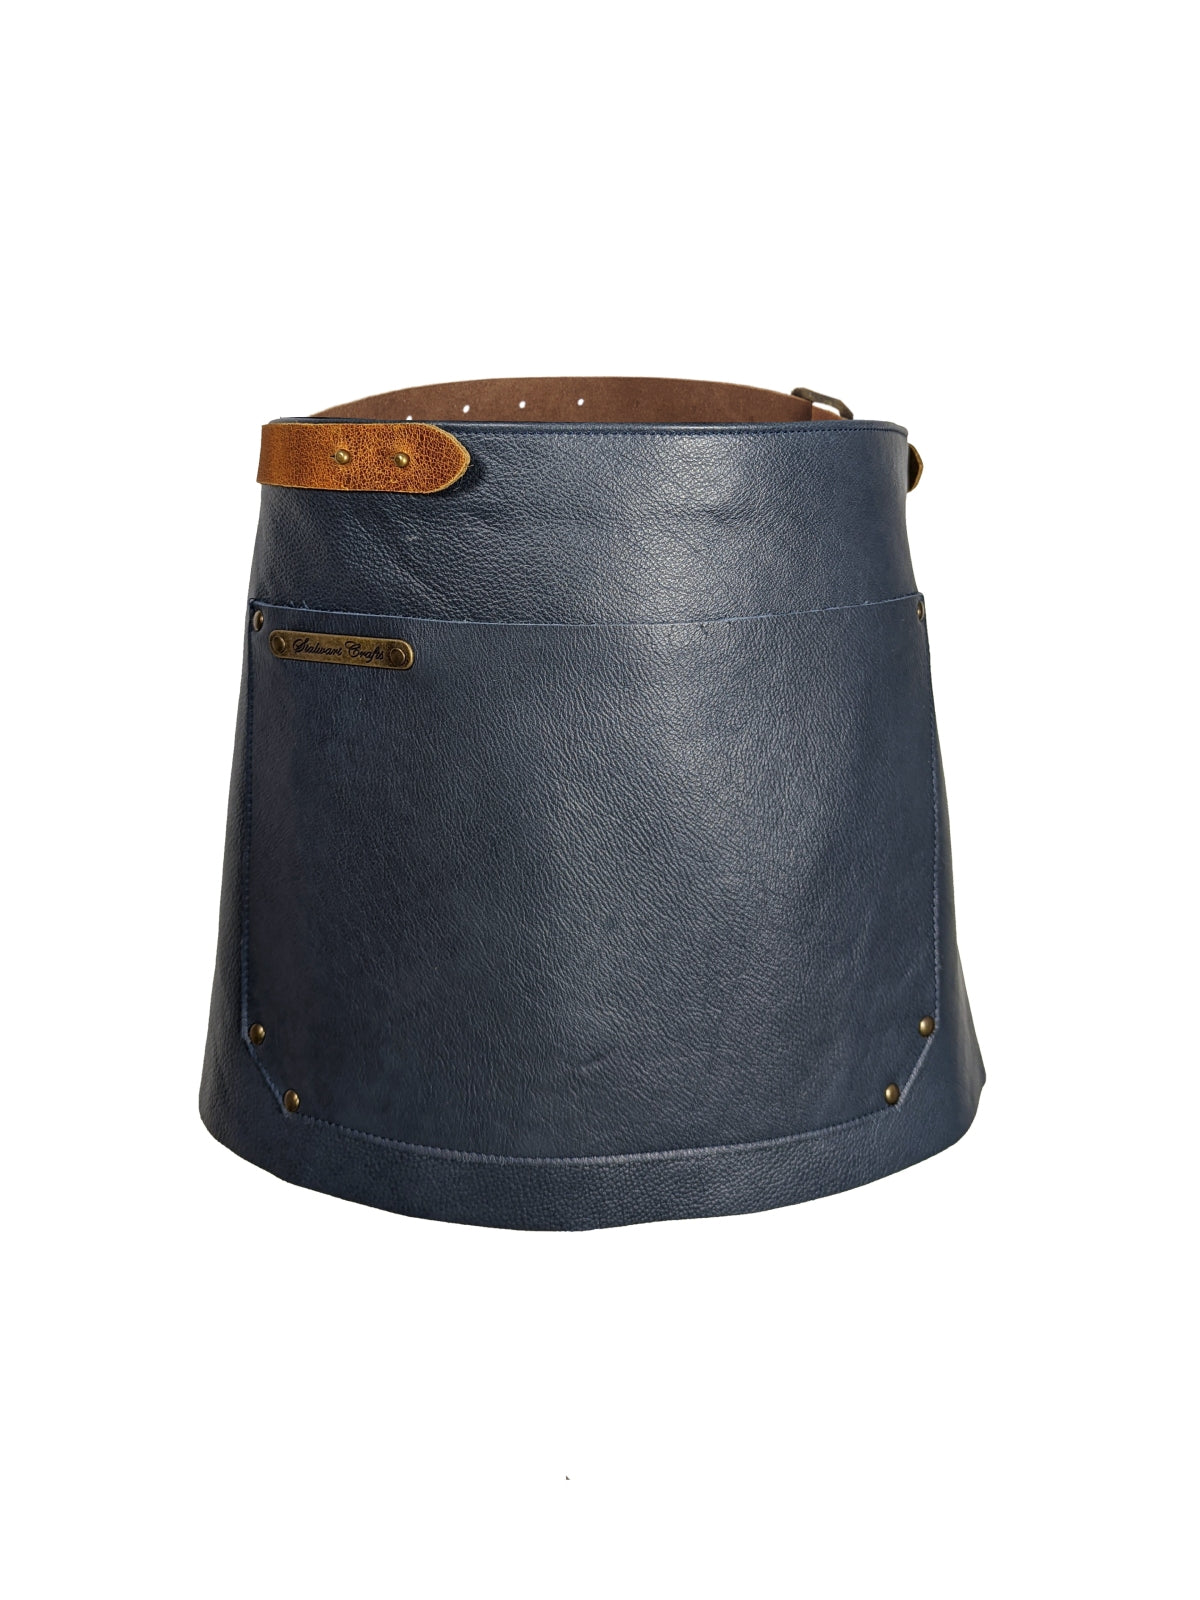 Leather Waist Apron Deluxe Blue by STW -  ChefsCotton